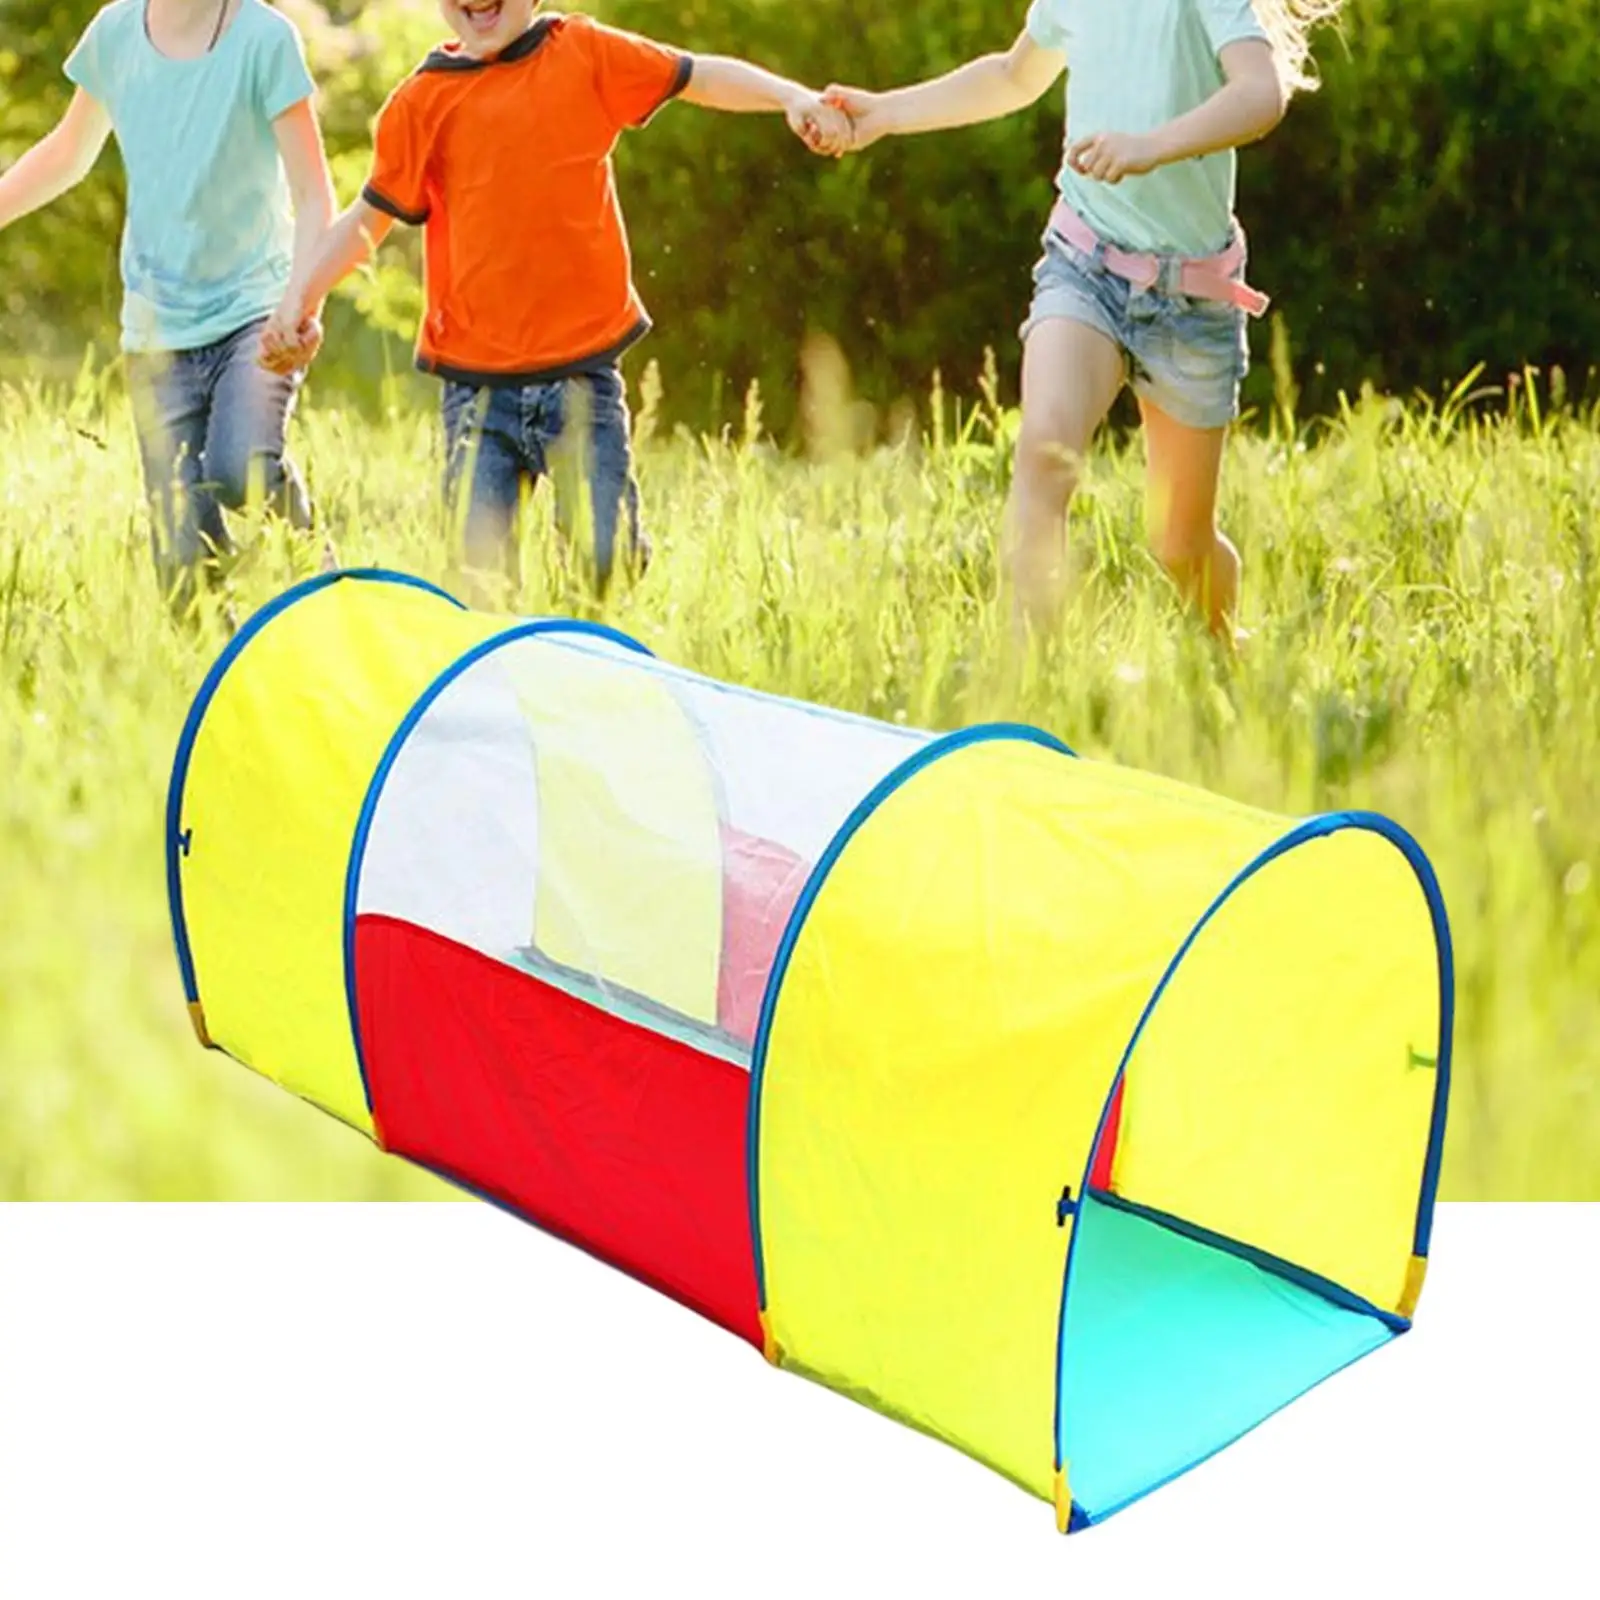 Kids Play Tunnel Tent Arch Tunnel Indoor Outdoor Game Climbing Toy Collapsible Tunnel Backyard Playset for Boys Toddlers Infants